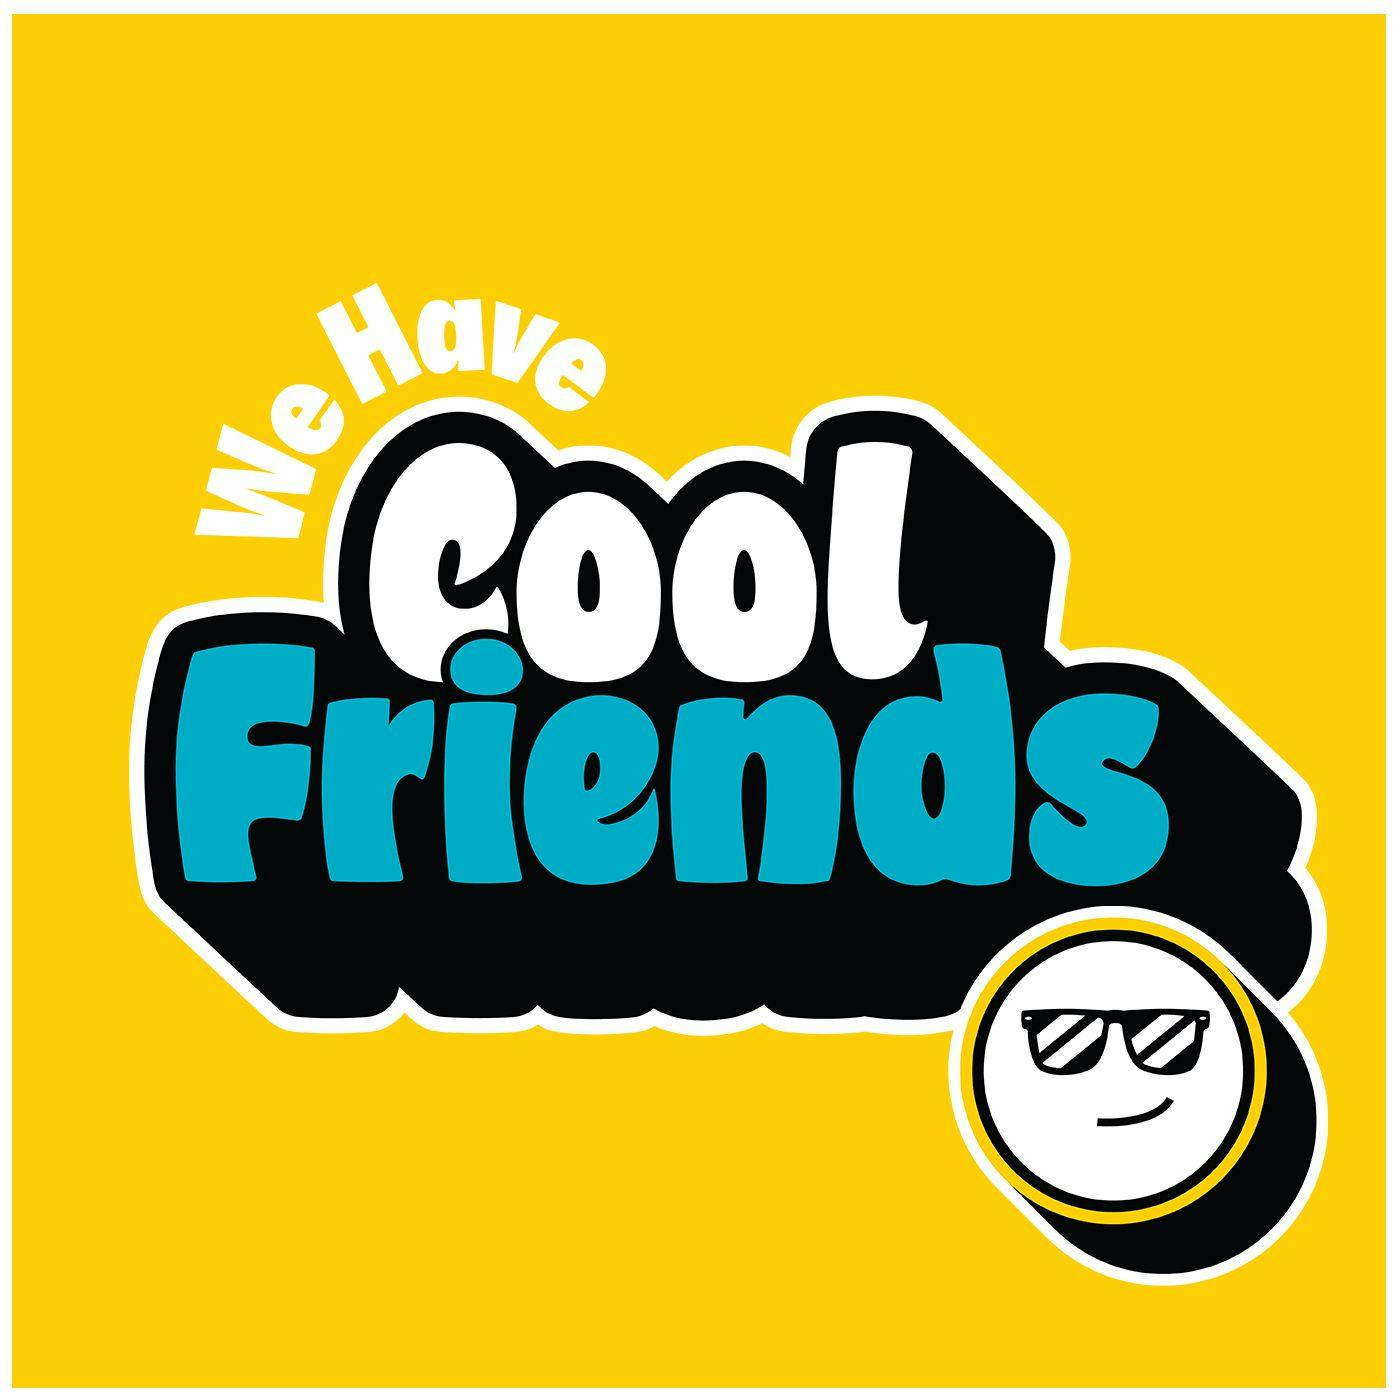 We Have Cool Friends Theme (By Tyler Luecke)